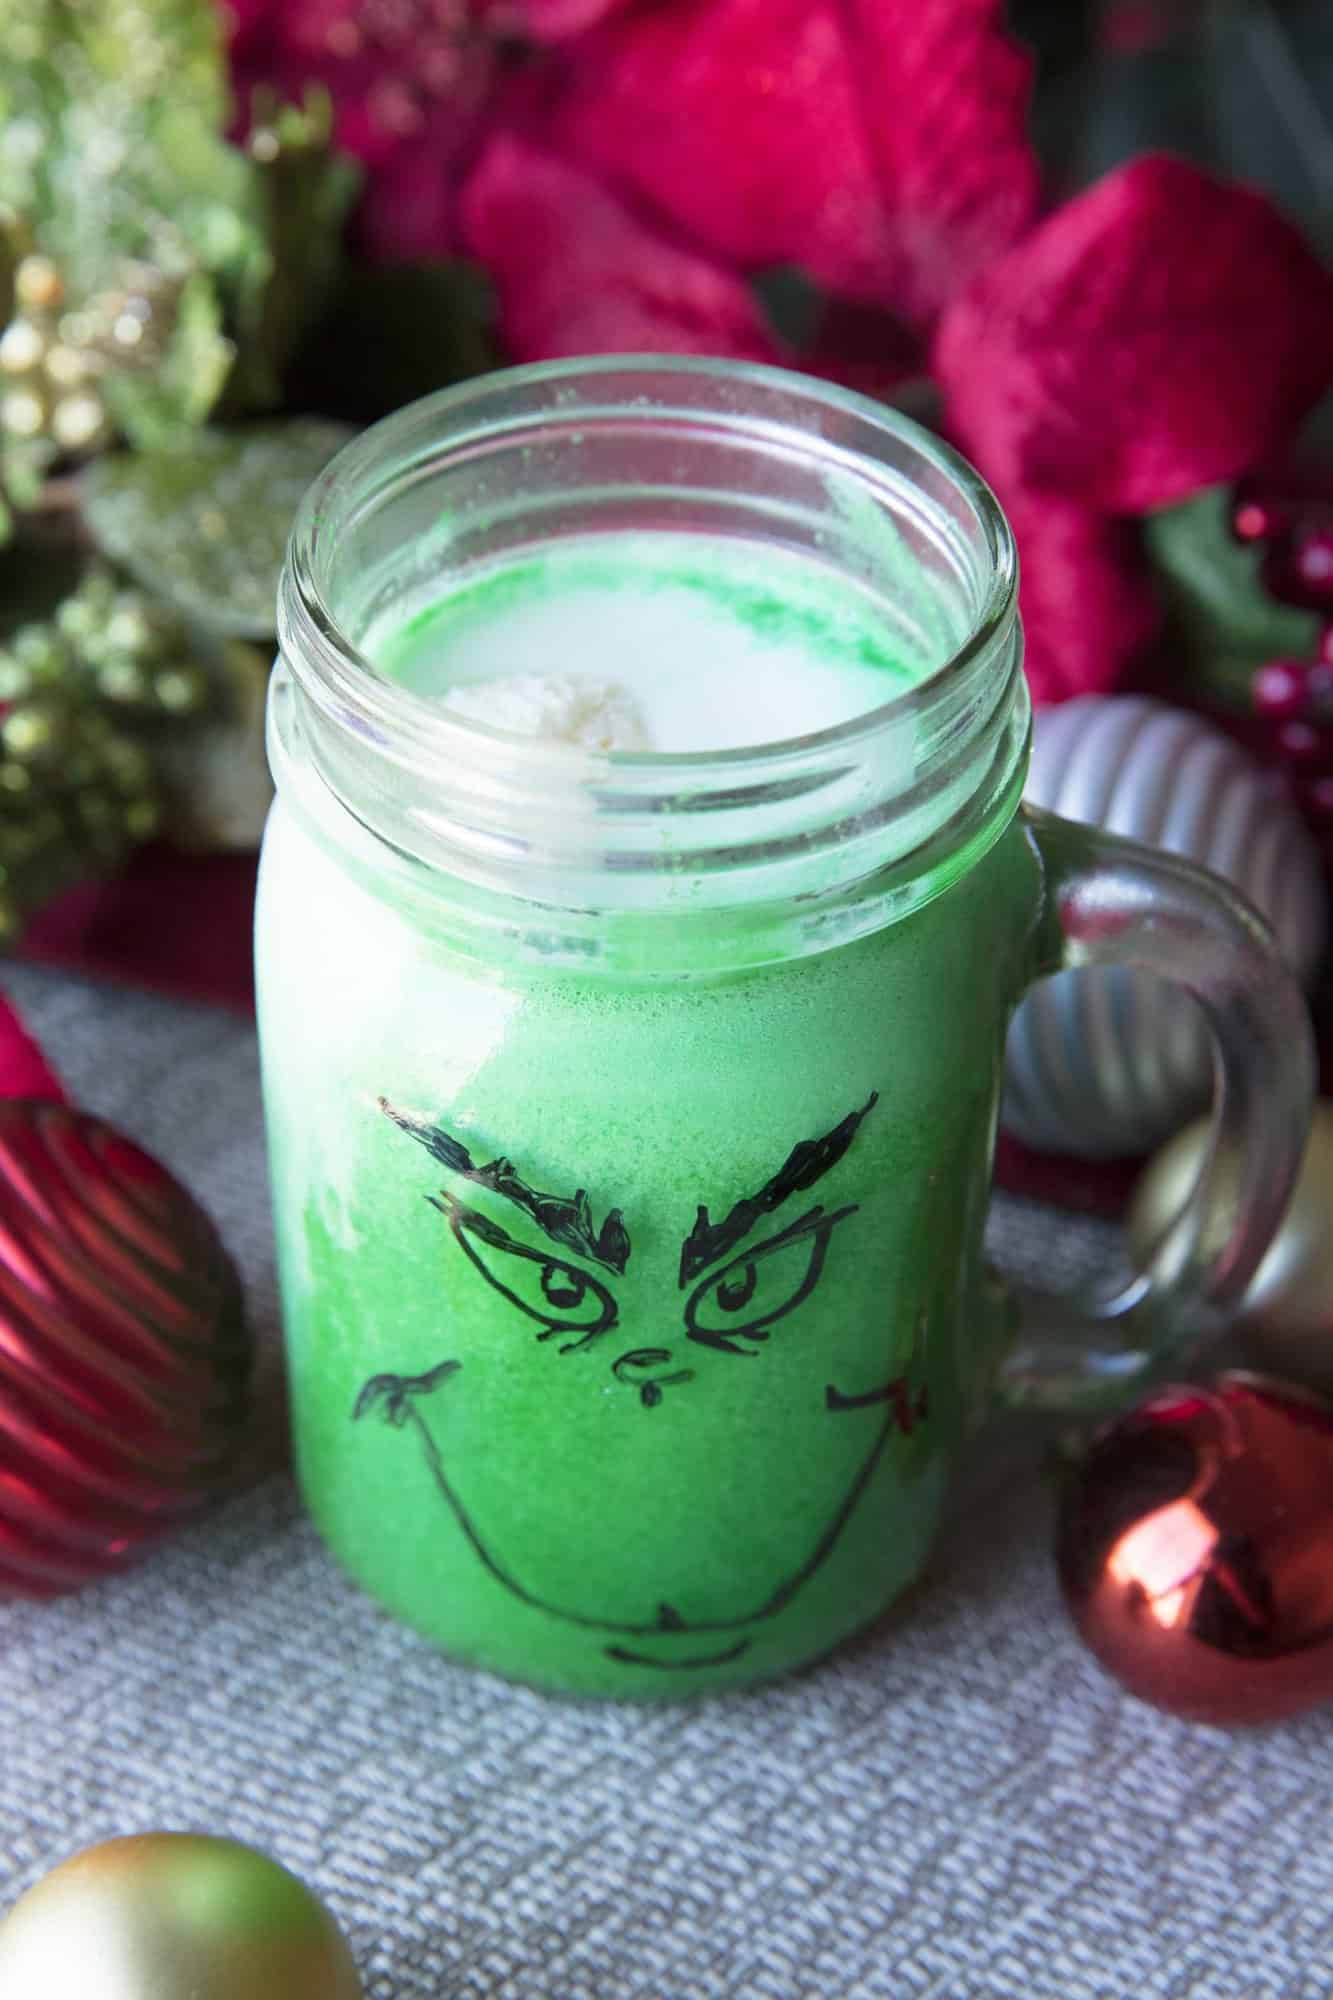 Your heart doesn't have to be two sizes too small to enjoy this Christmas treat! Grinch Punch is a super fun treat that is great for Holiday parties!